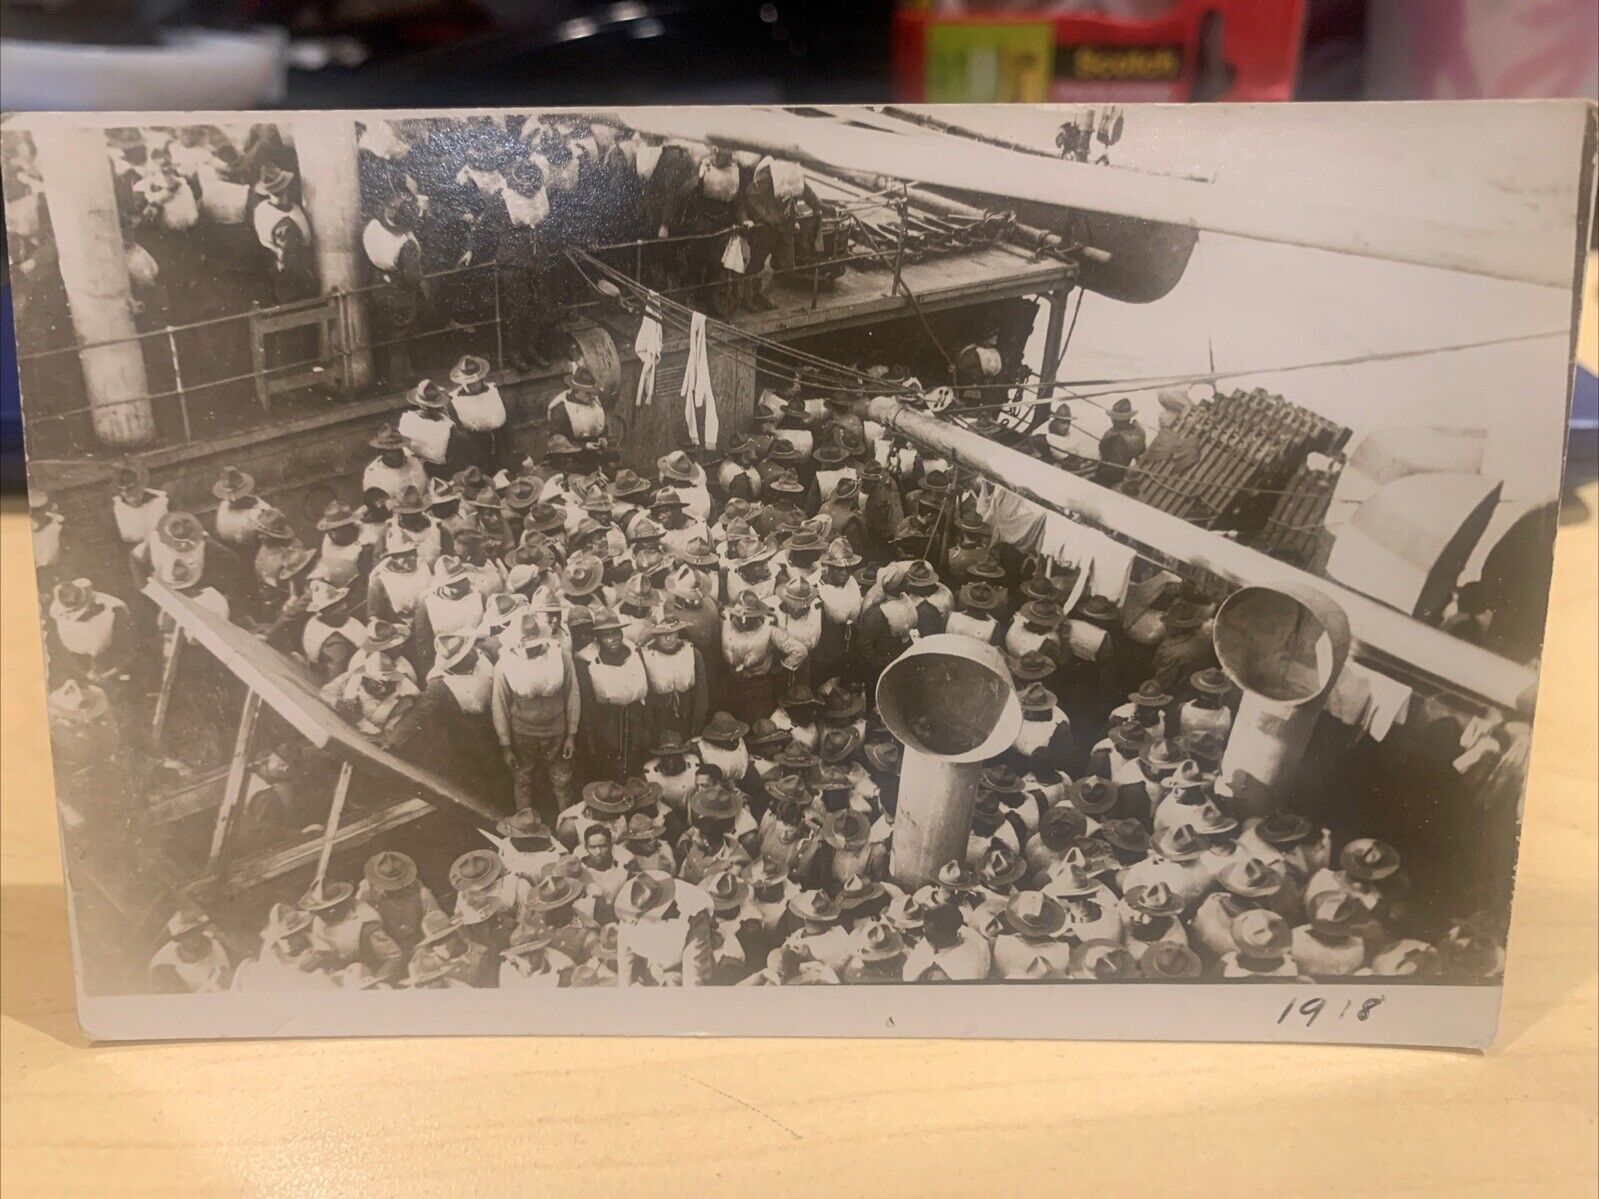 WW1 US ARMY AEF TROOPSHIP PRESIDENT LINCOLN AT SEA 1918,PHOTO POSTCARD,LOOK